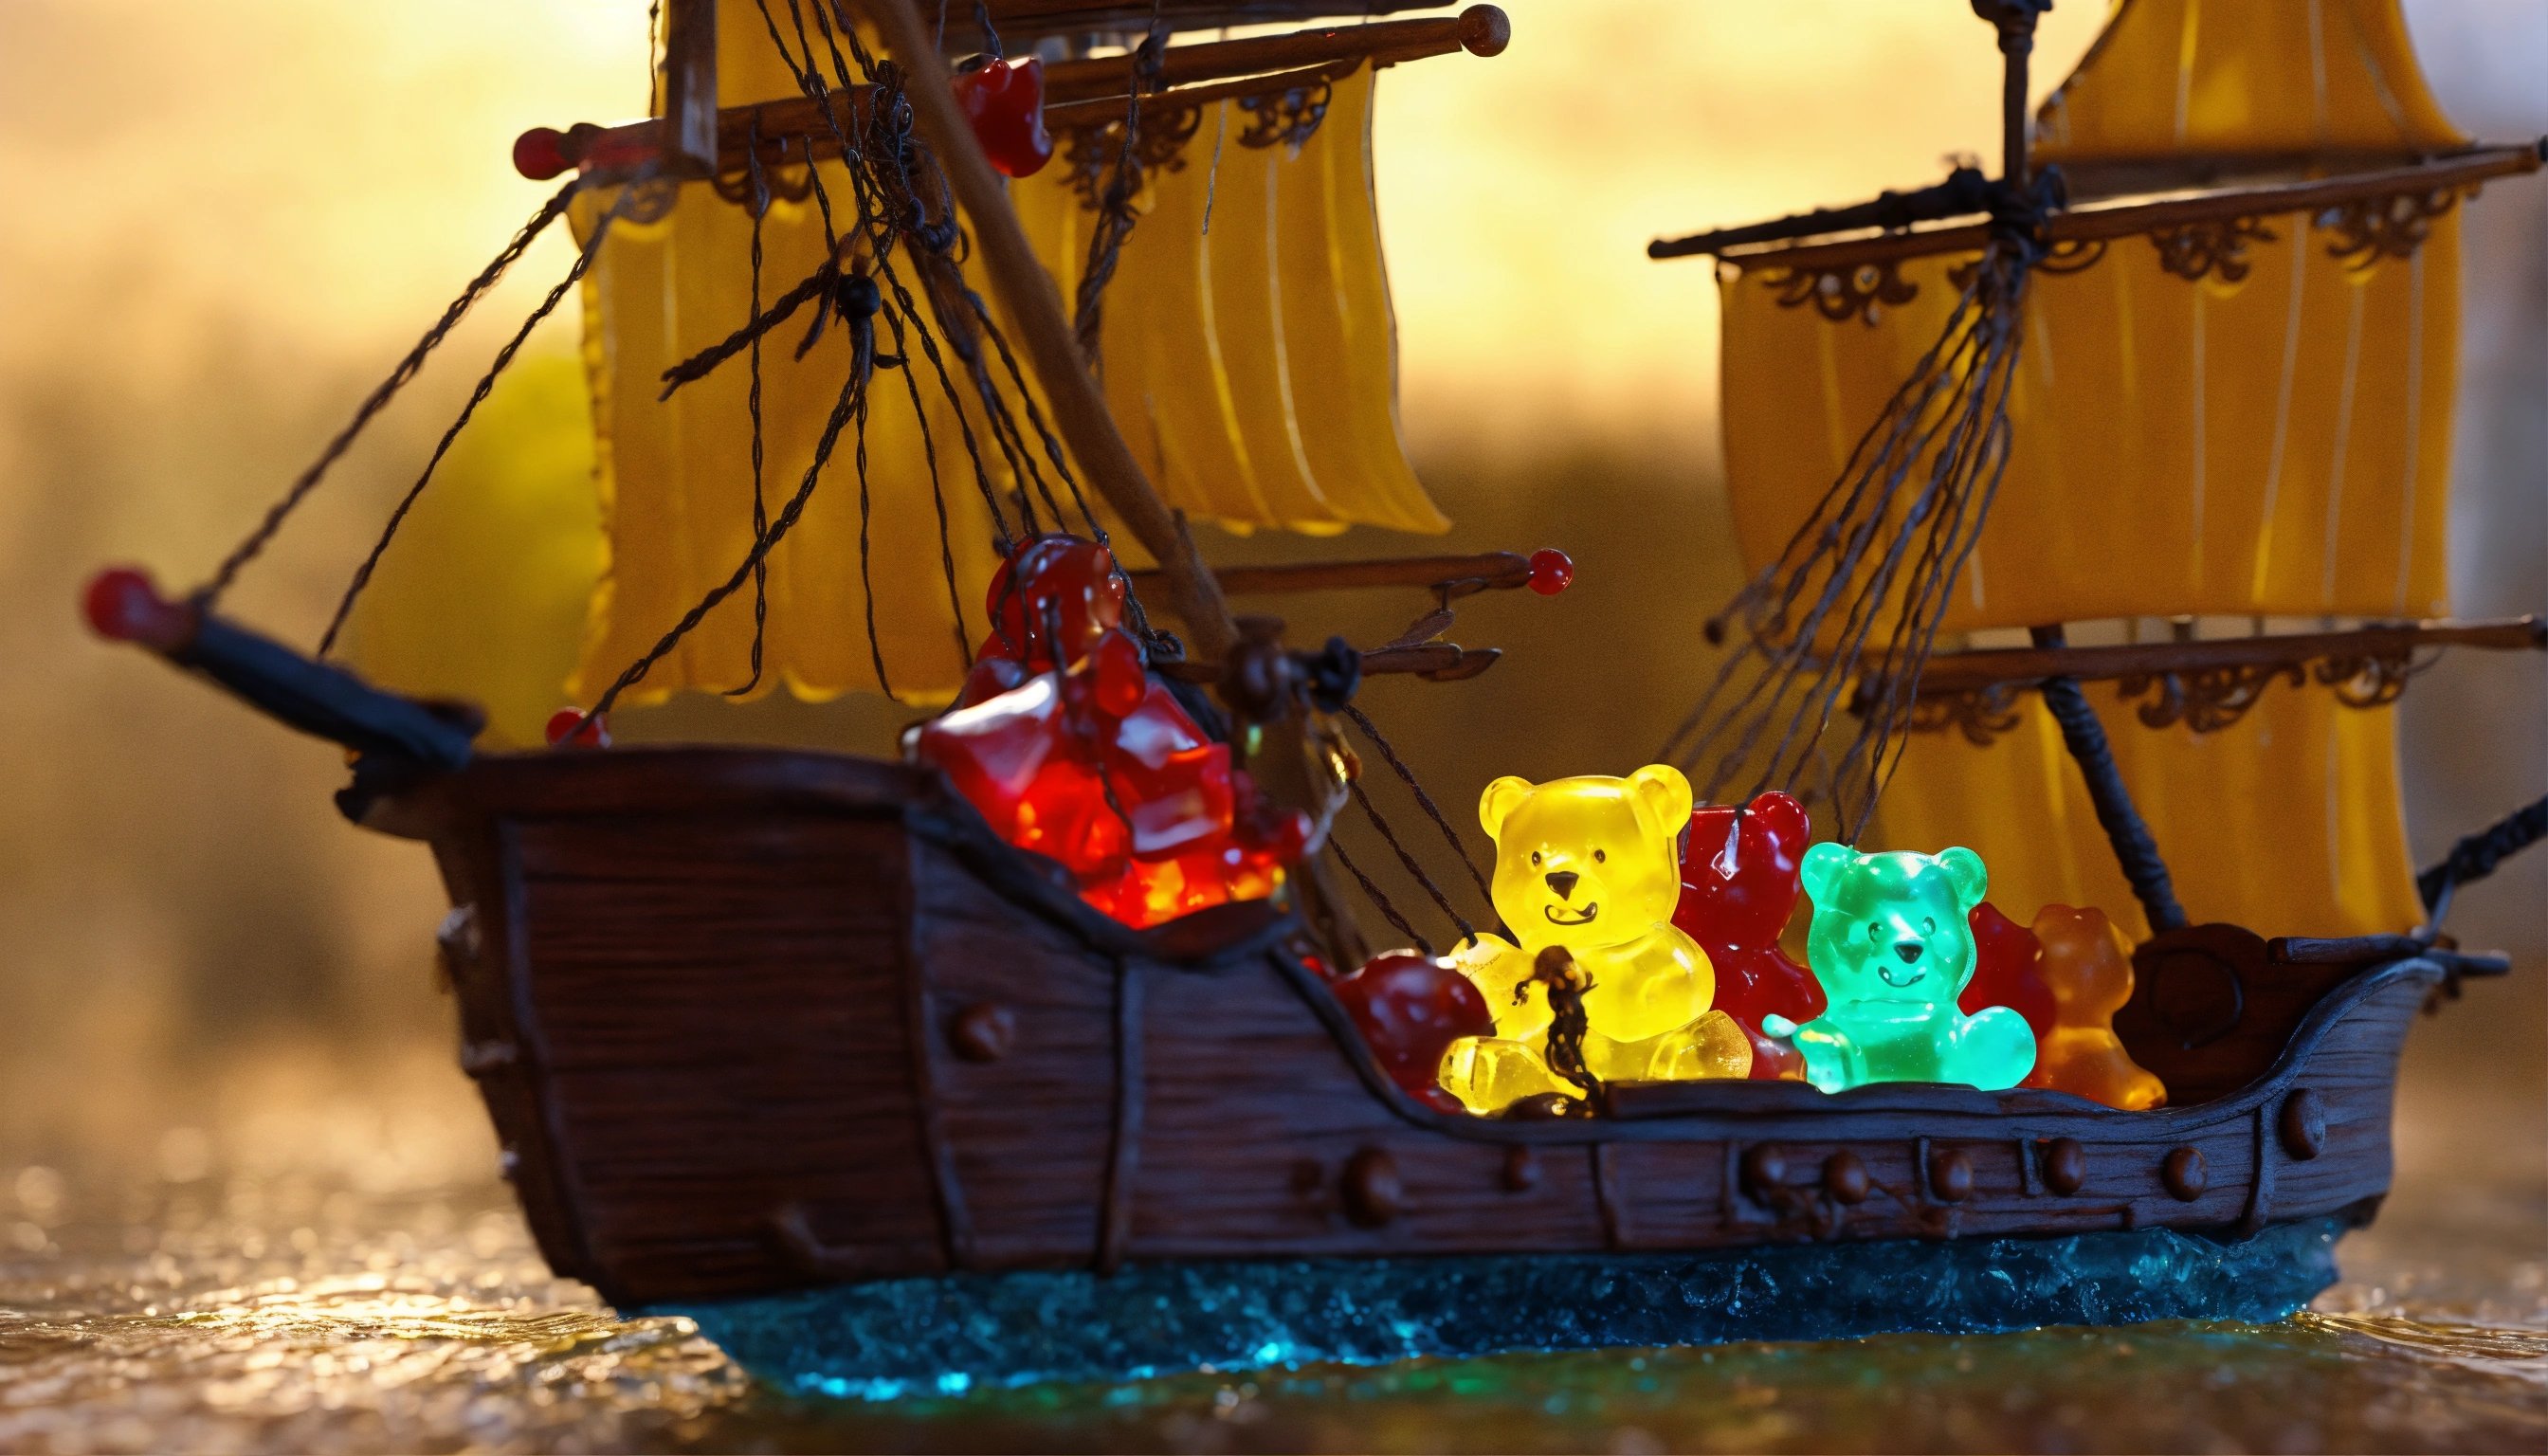 Two Gummy Bears dueling on a pirate ship (2).jpg